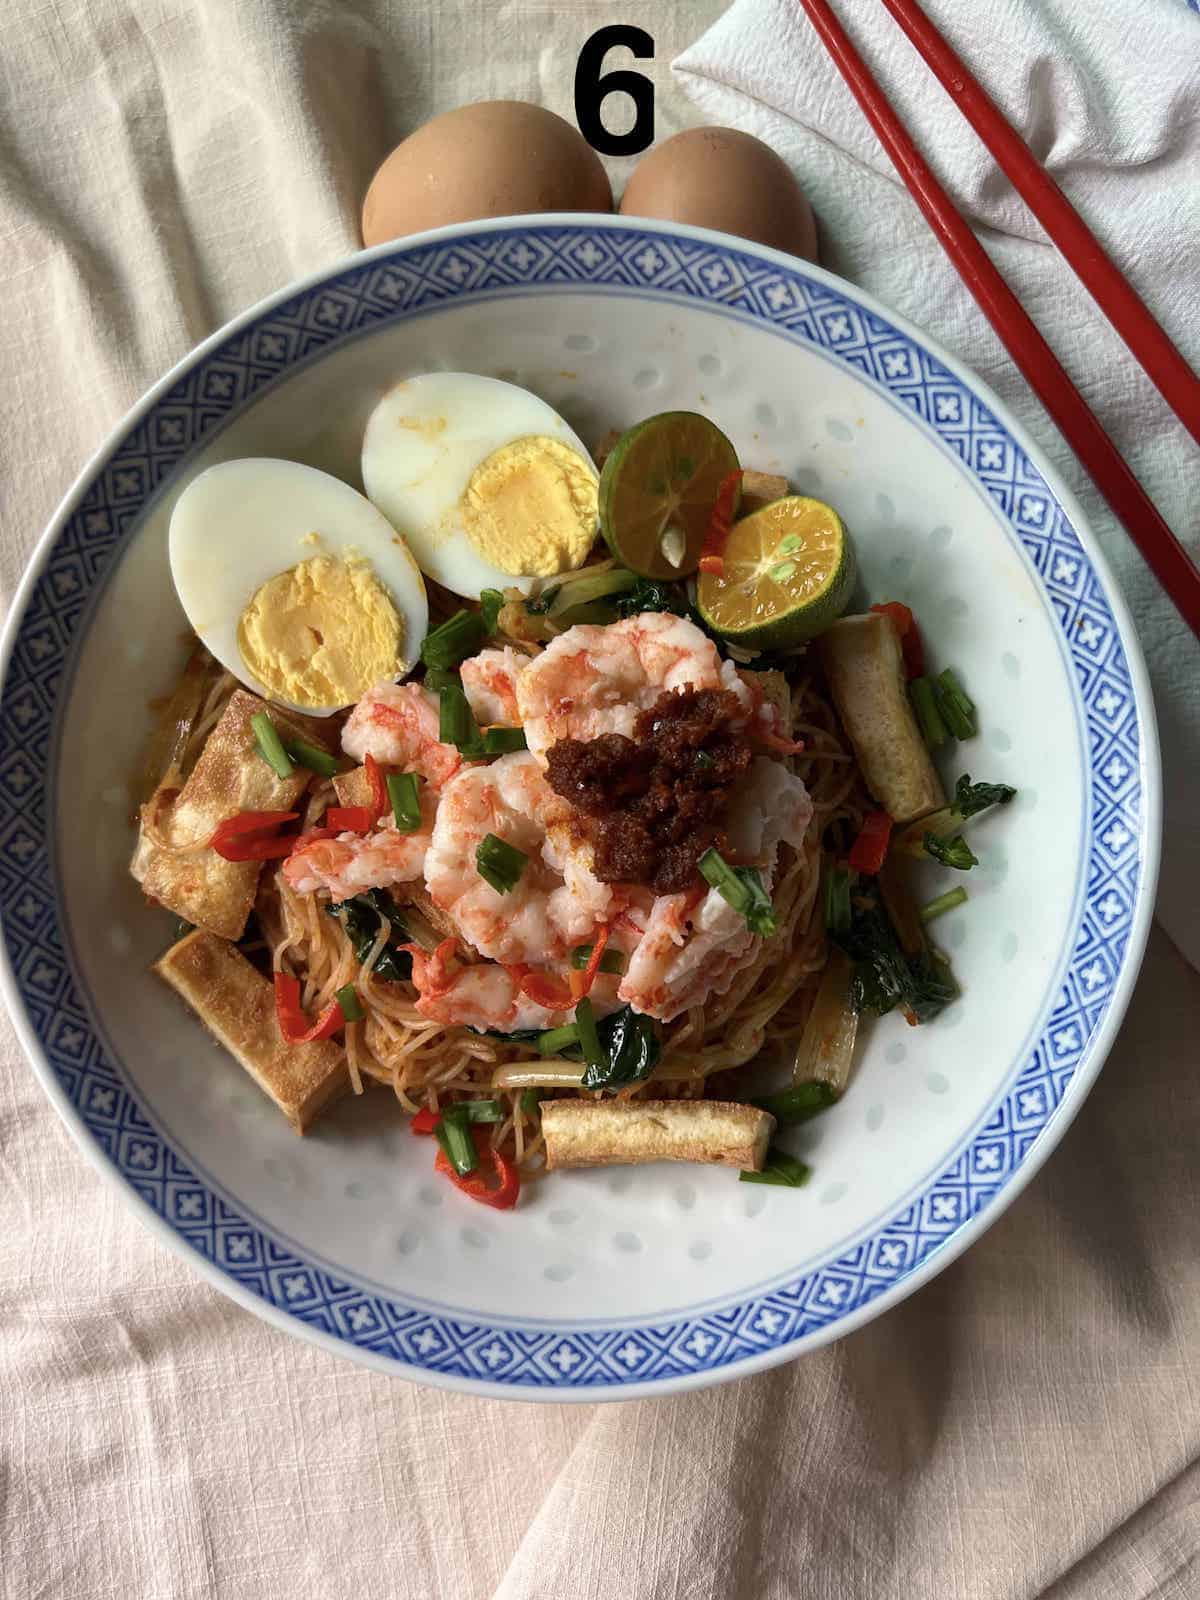 A bowl of noodles with egg, prawns, chives and tofu.